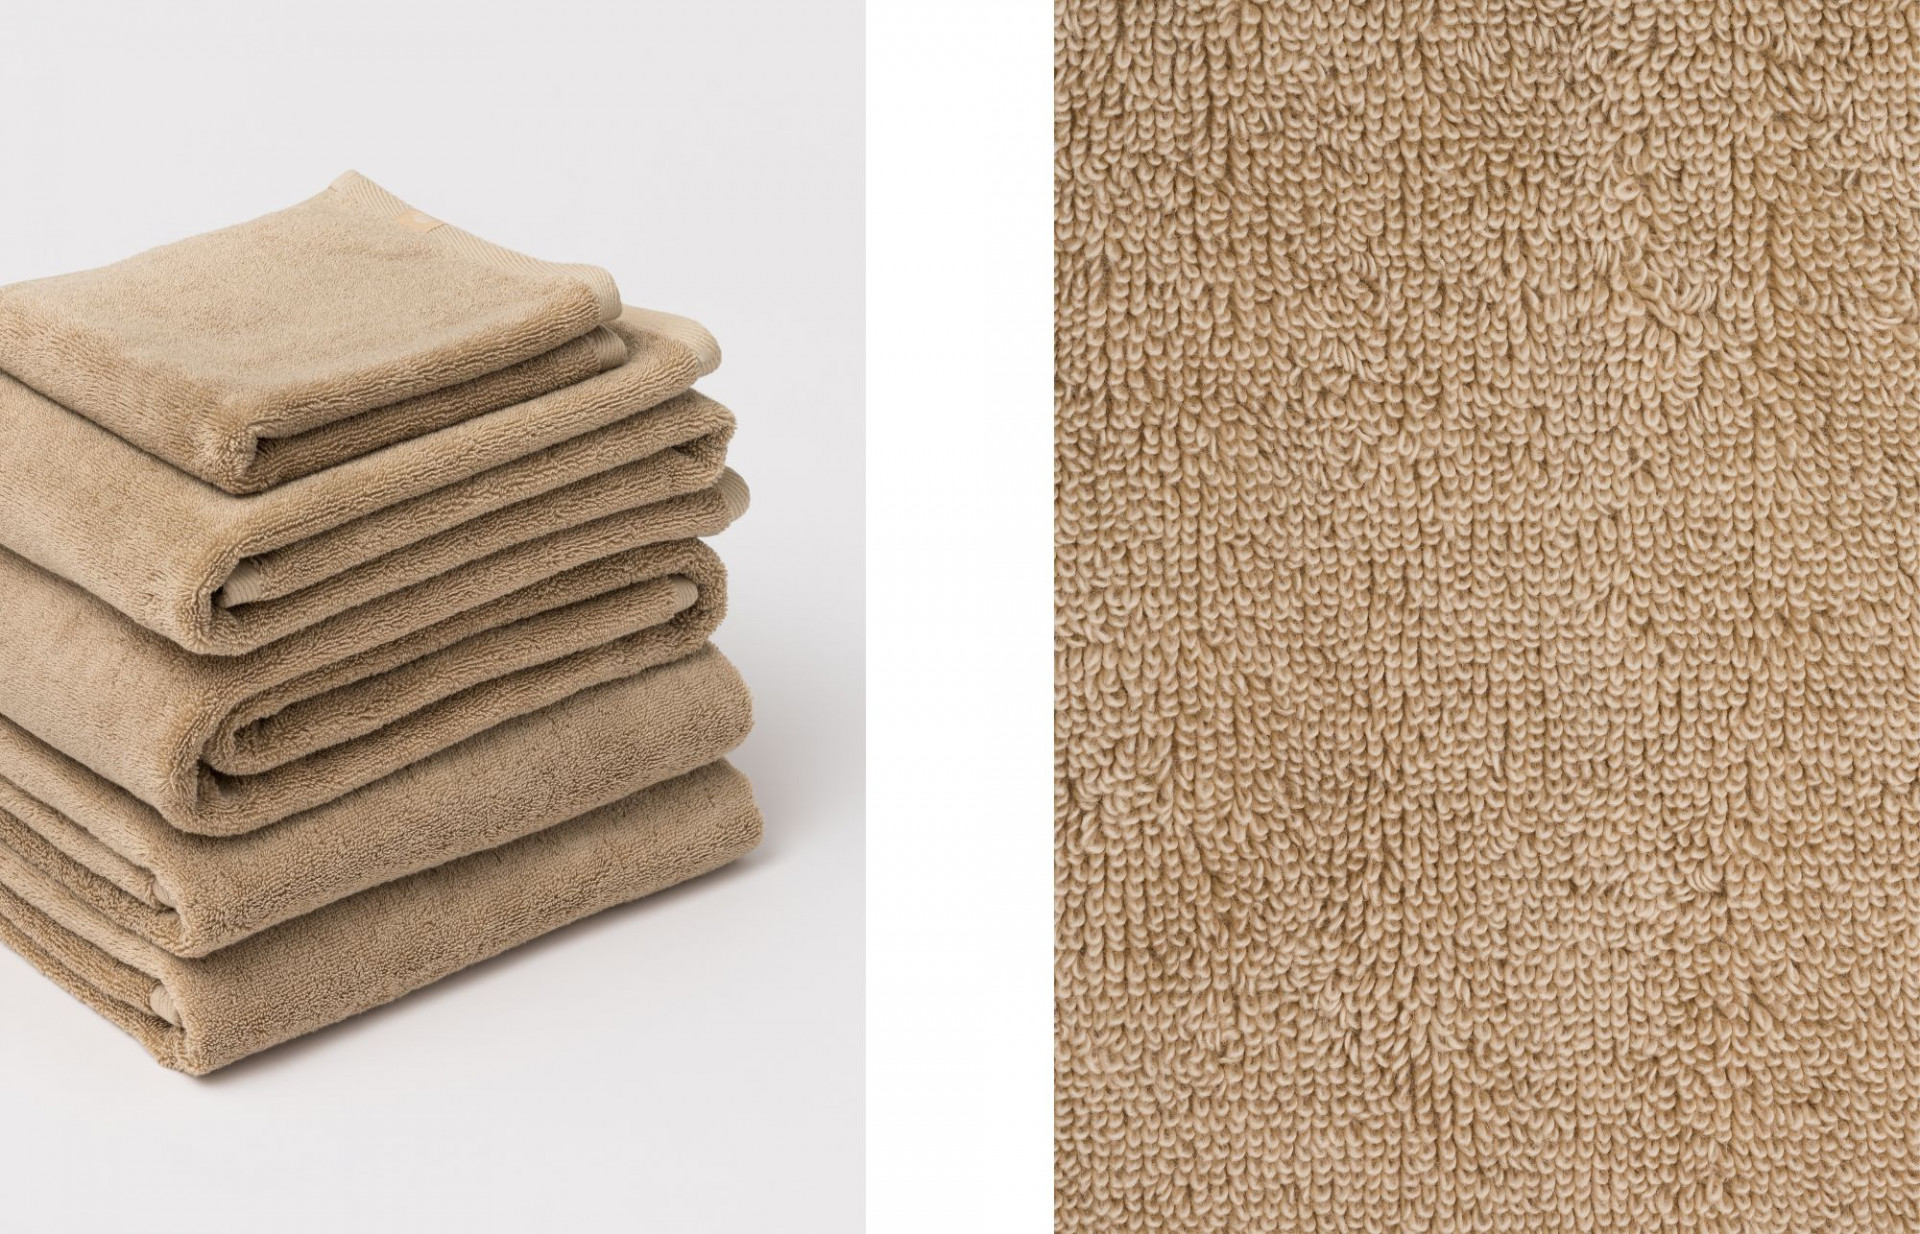 Only the finest cotton fibre is used for every loop of our Delicate Cotton bath linen.